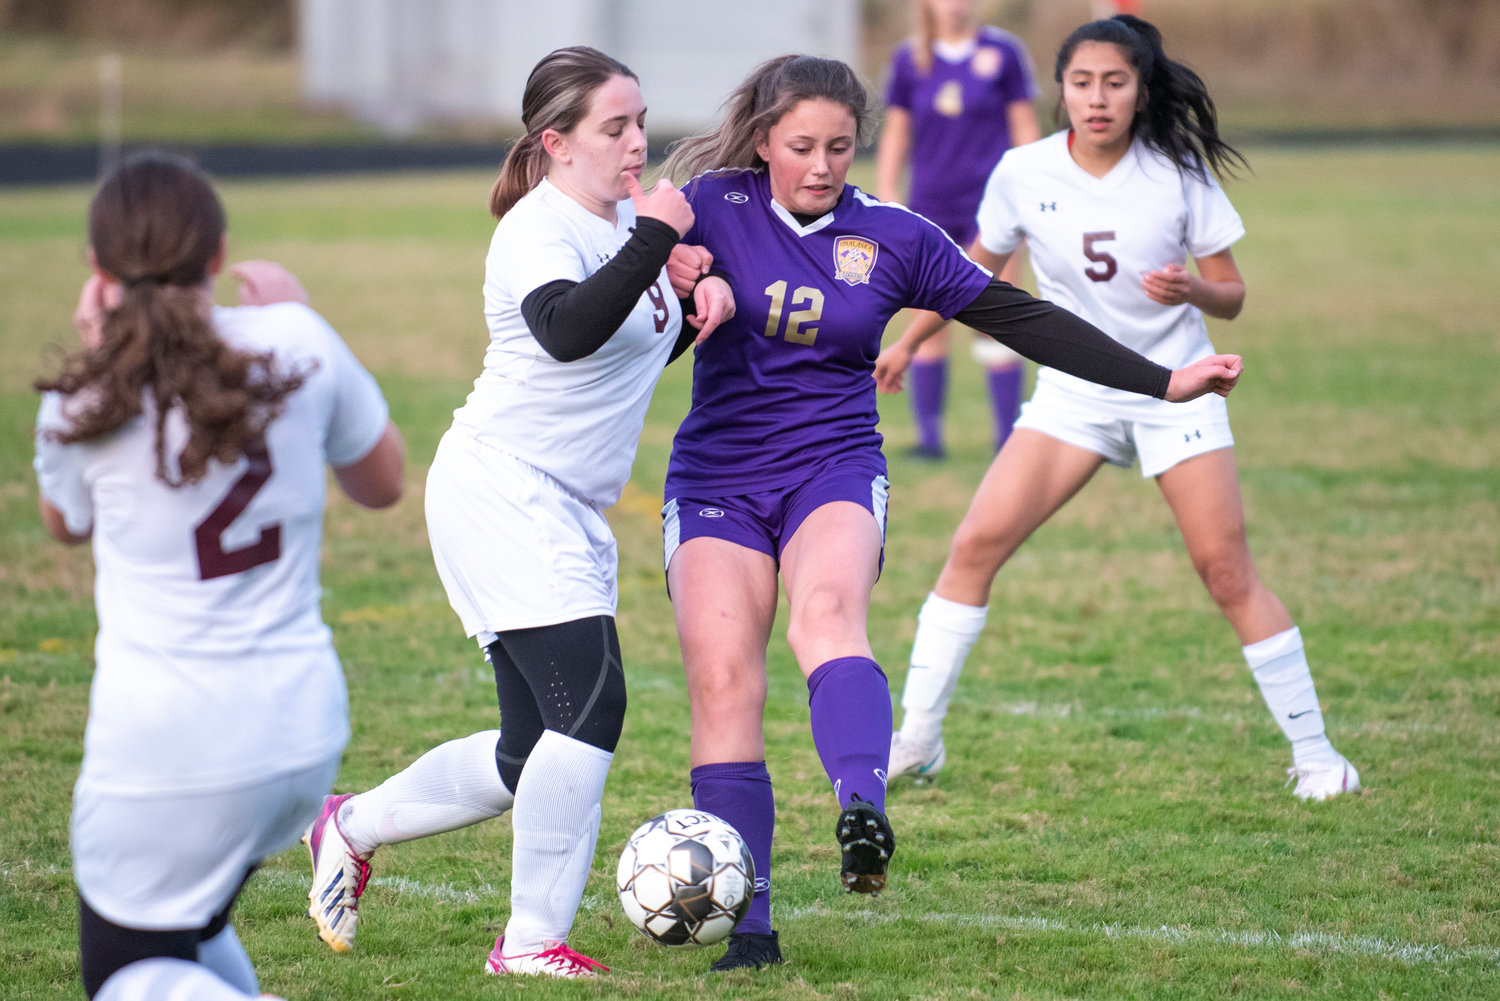 Onalaska's Jules Auman (12) gets a pass off while Winlock's Maggie Maddox (9) defends on Monday, Oct. 4, 2021...